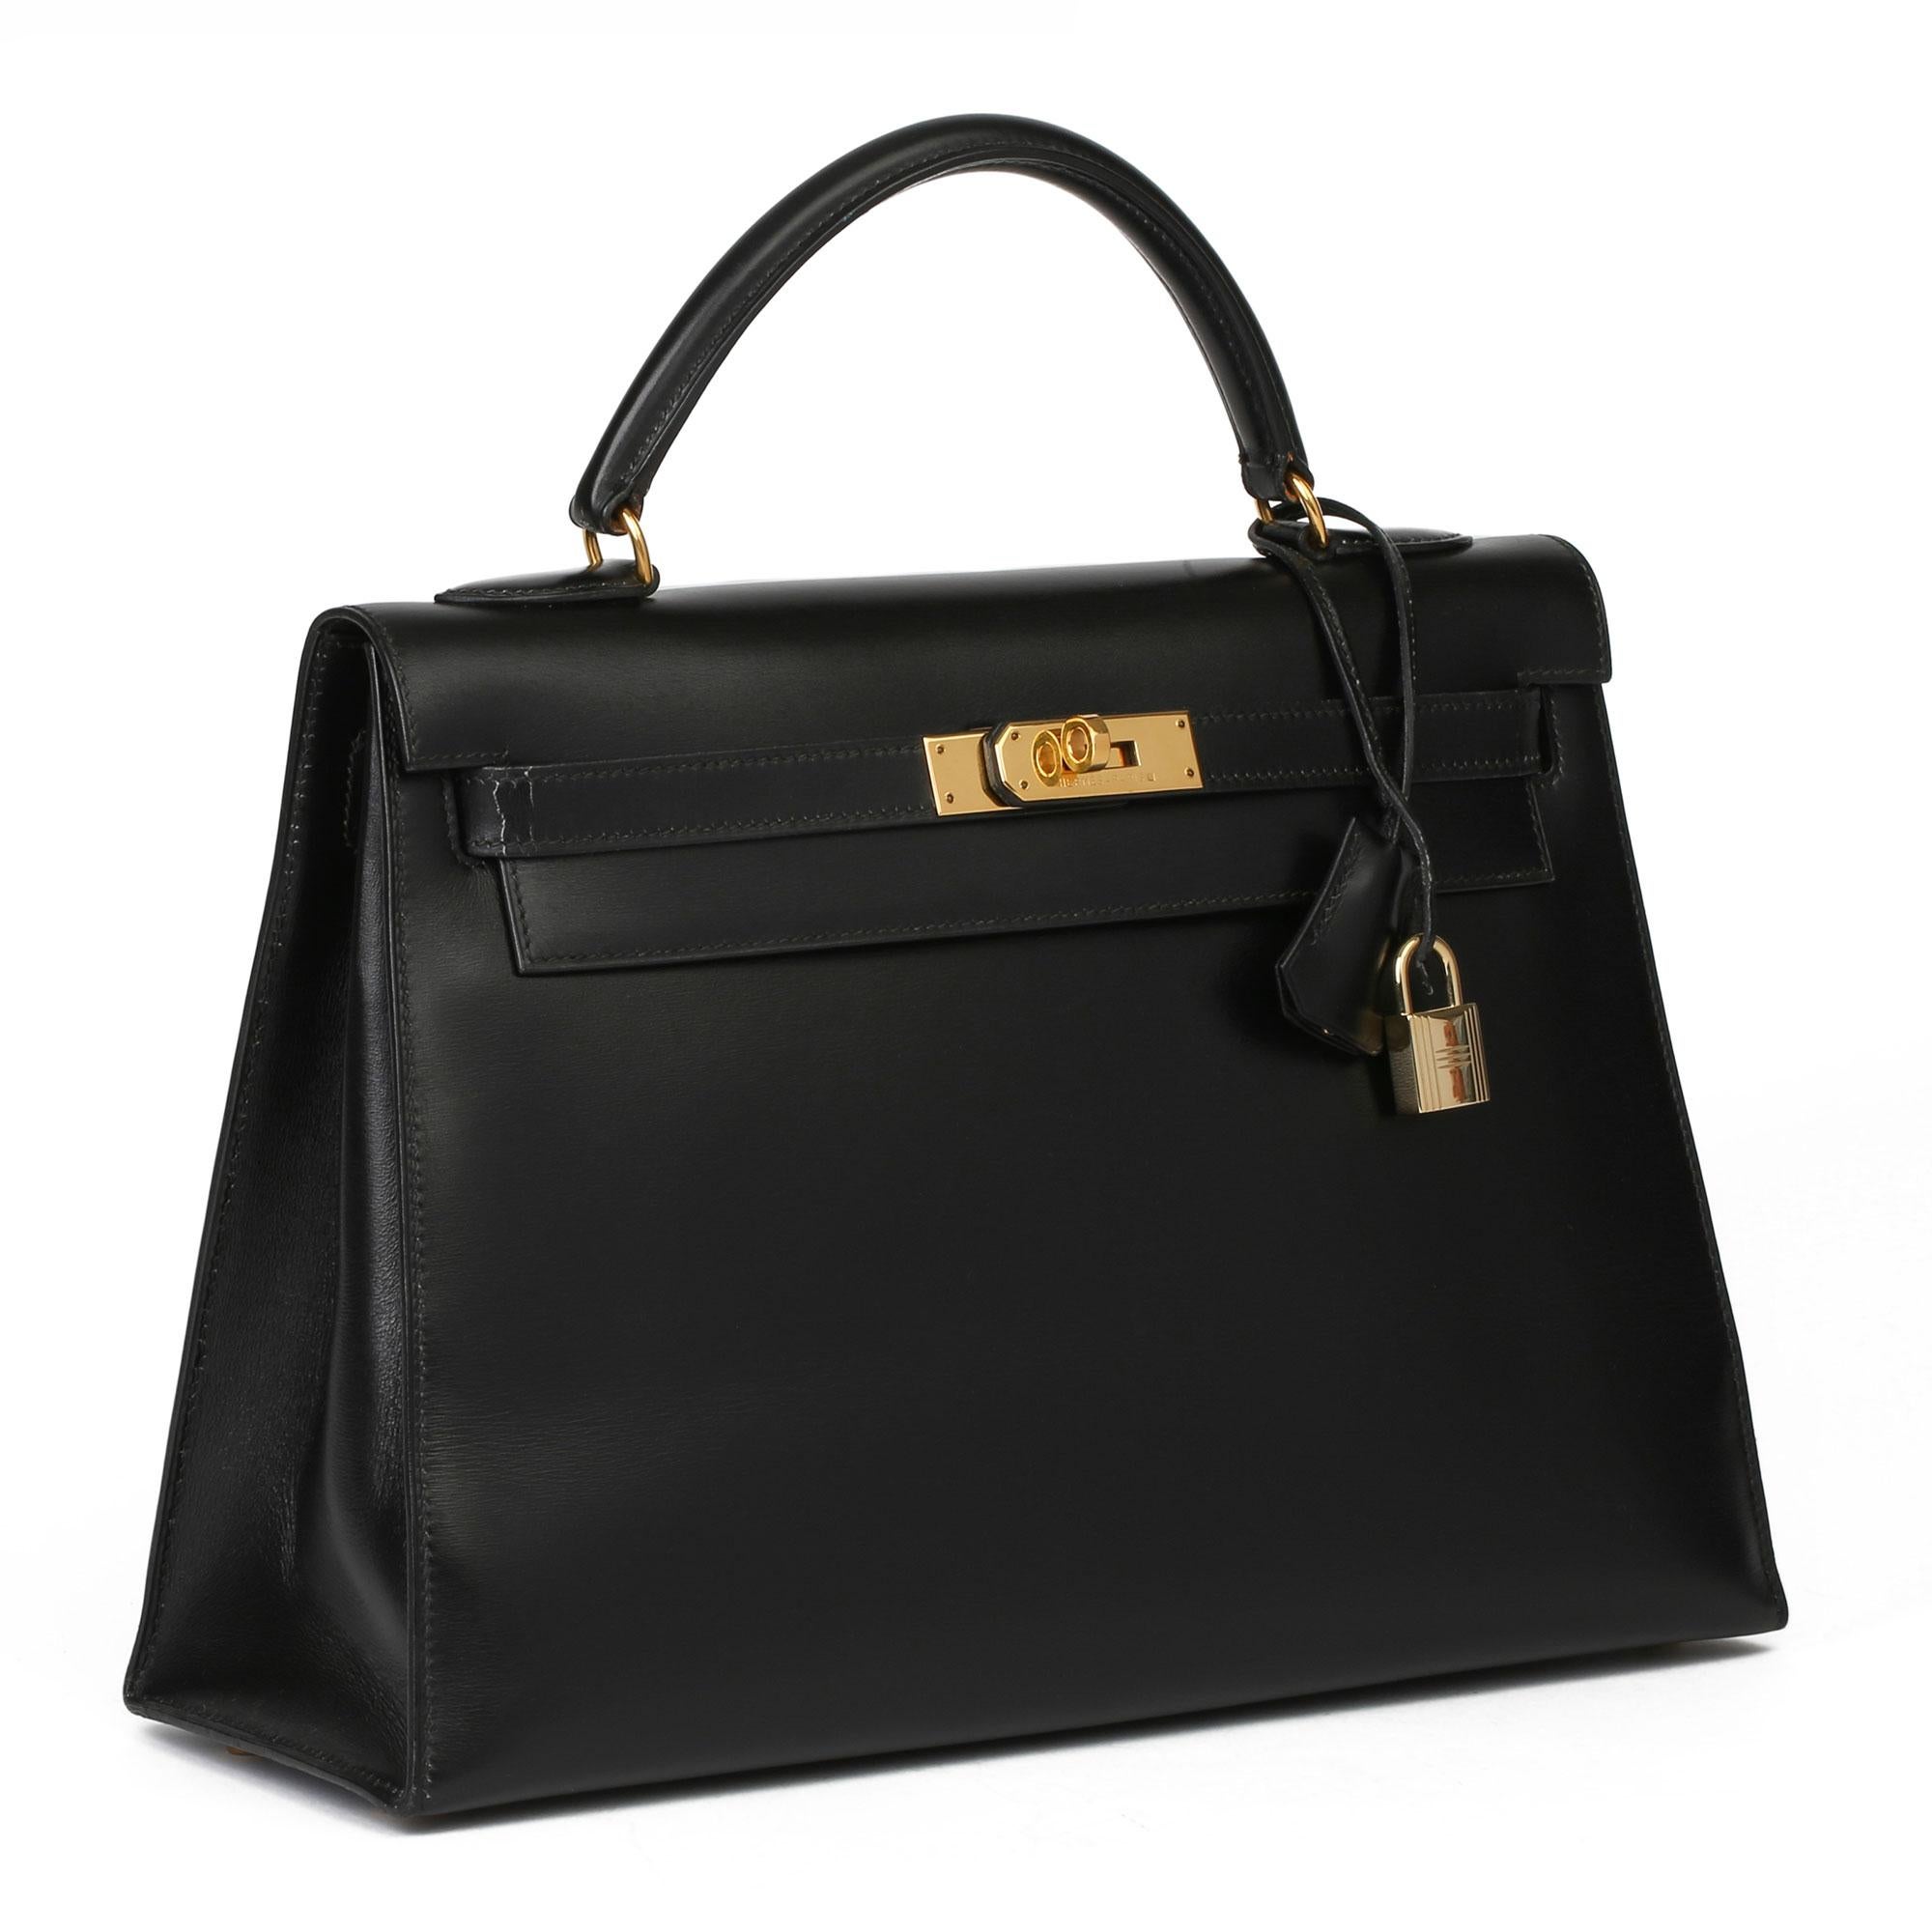 HERMÈS
Black Box Calf Leather Vintage Kelly 32cm Sellier

Xupes Reference: JJLG045
Serial Number: (X)
Age (Circa): 1994
Accompanied By: Hermès Dust Bag, Padlock, Keys, Clochette, Shoulder Strap
Authenticity Details: Date Stamp (Made in France)